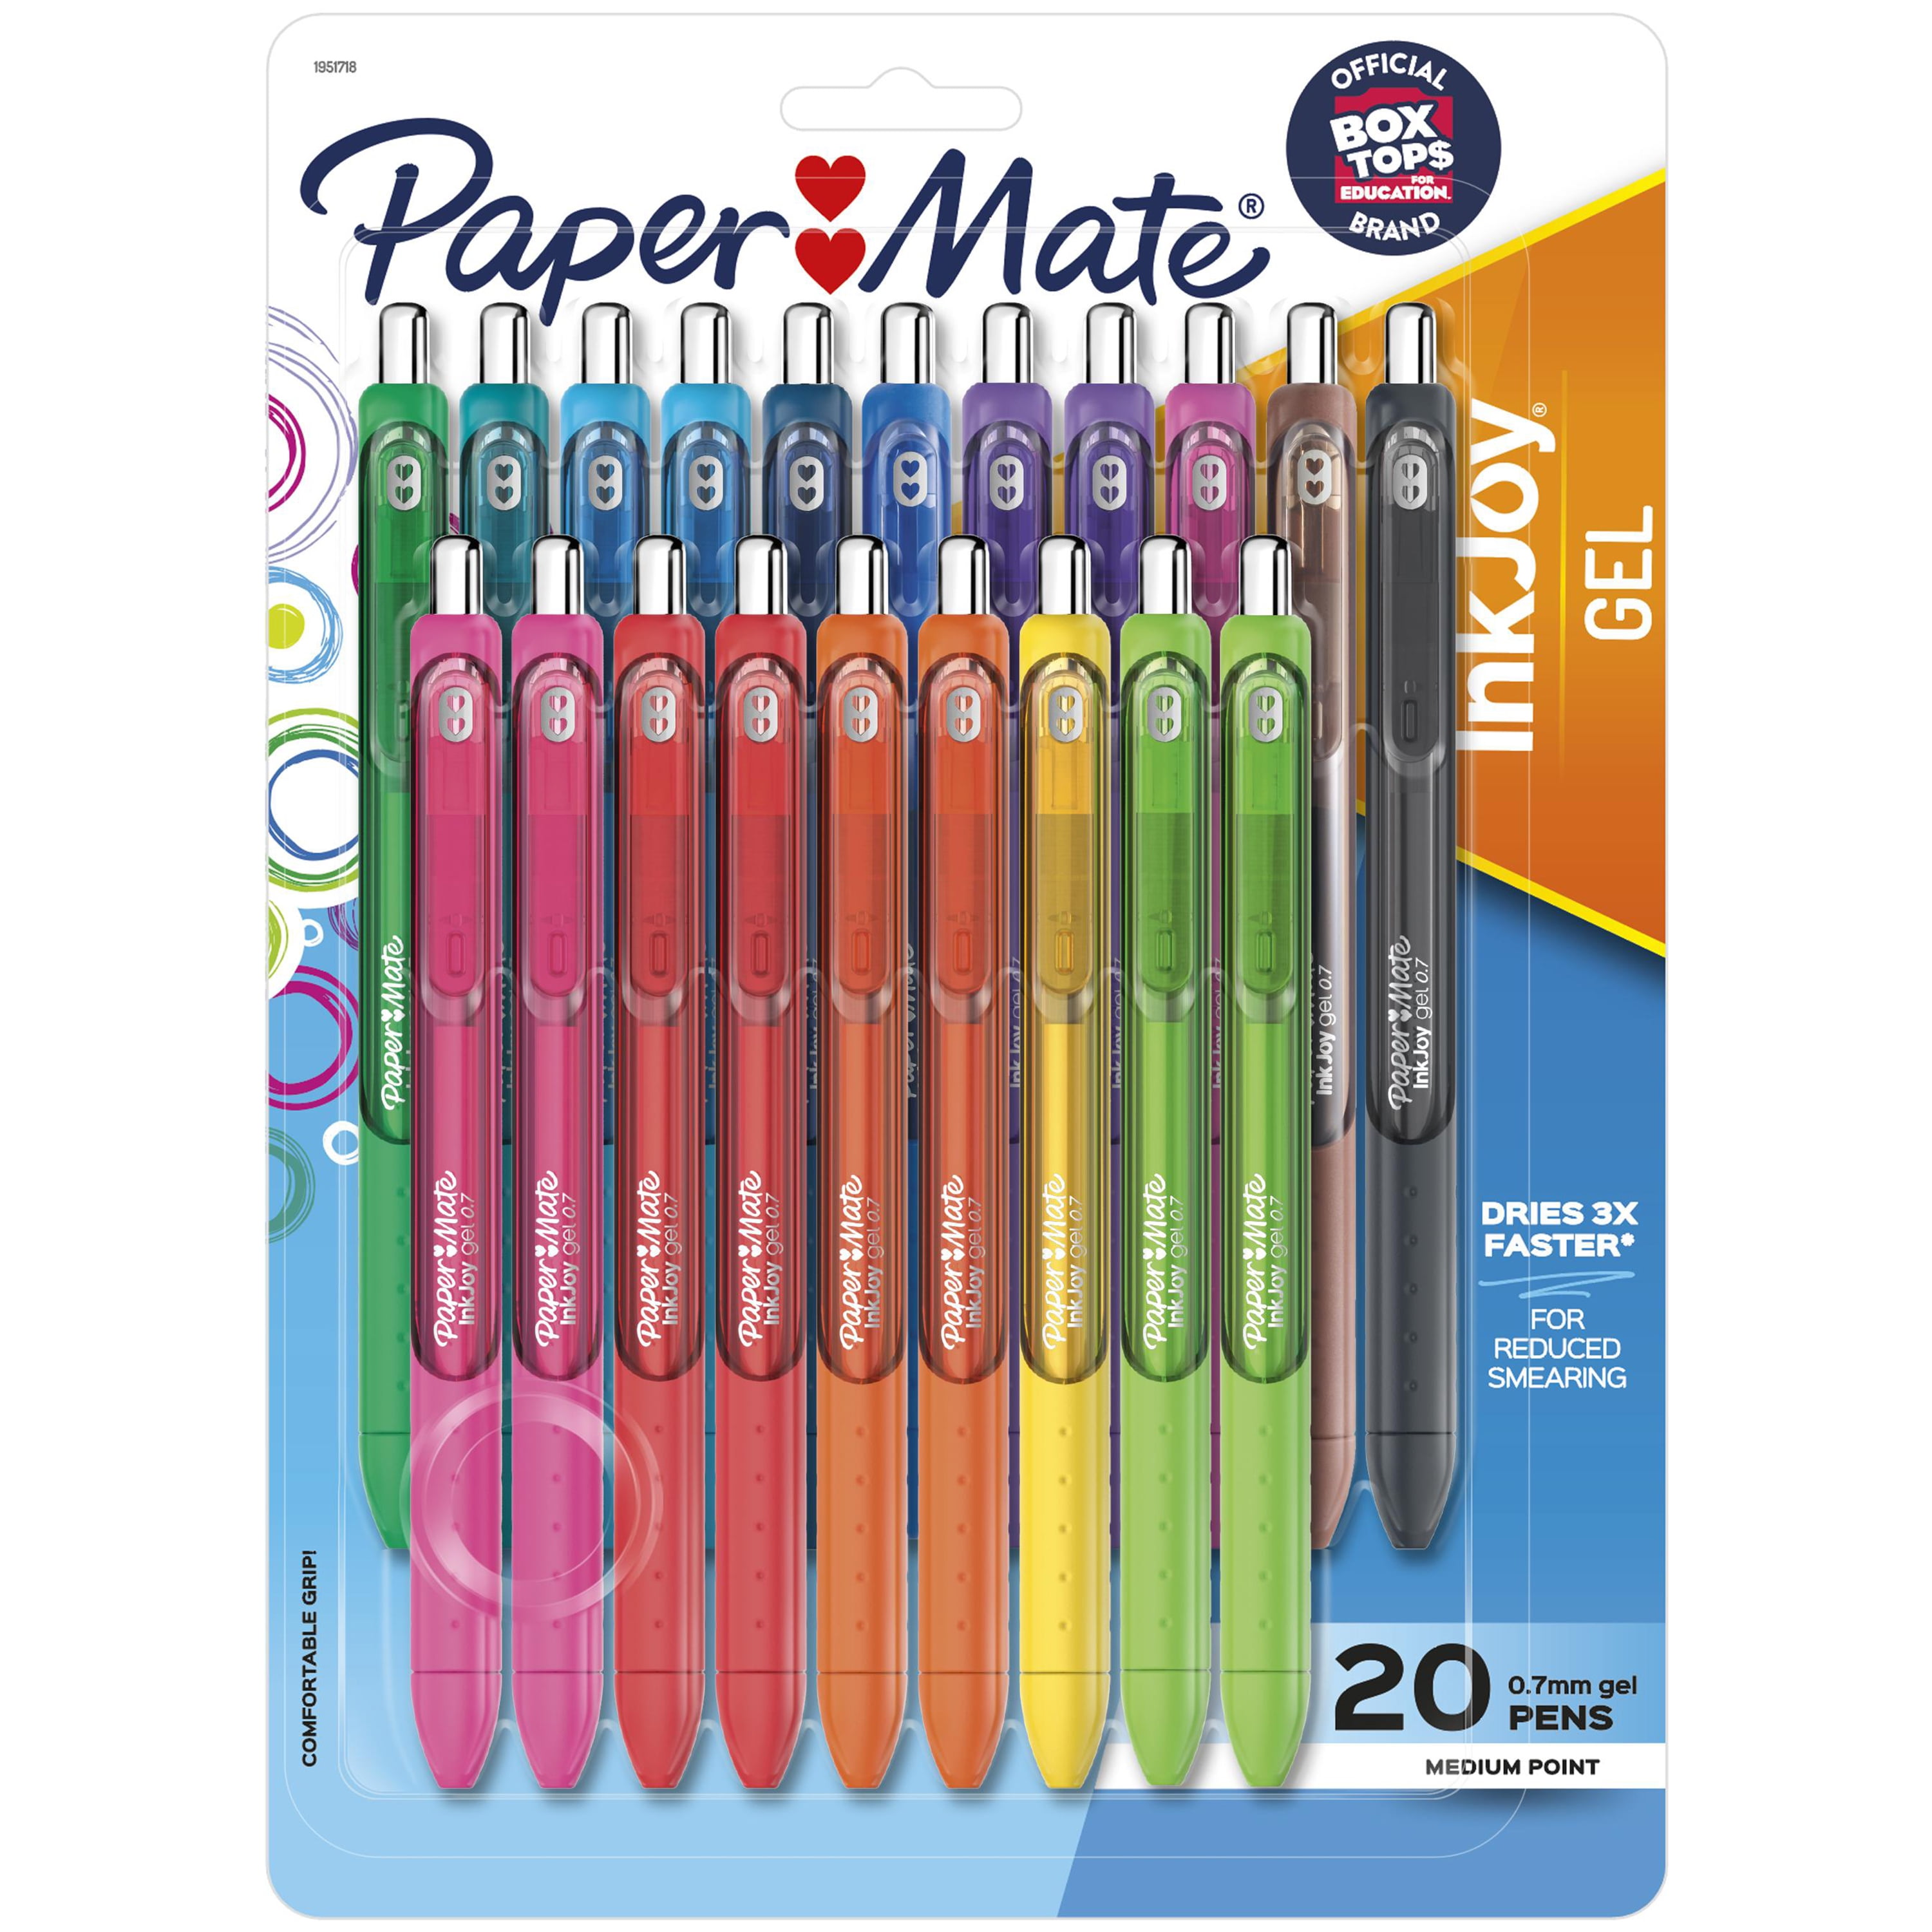 Office Supplies Medium Point Pens 20 Count Assorted Writing Pens for School Supplies 20 Pack.1 Pack InkJoy Retractable Ballpoint Pens